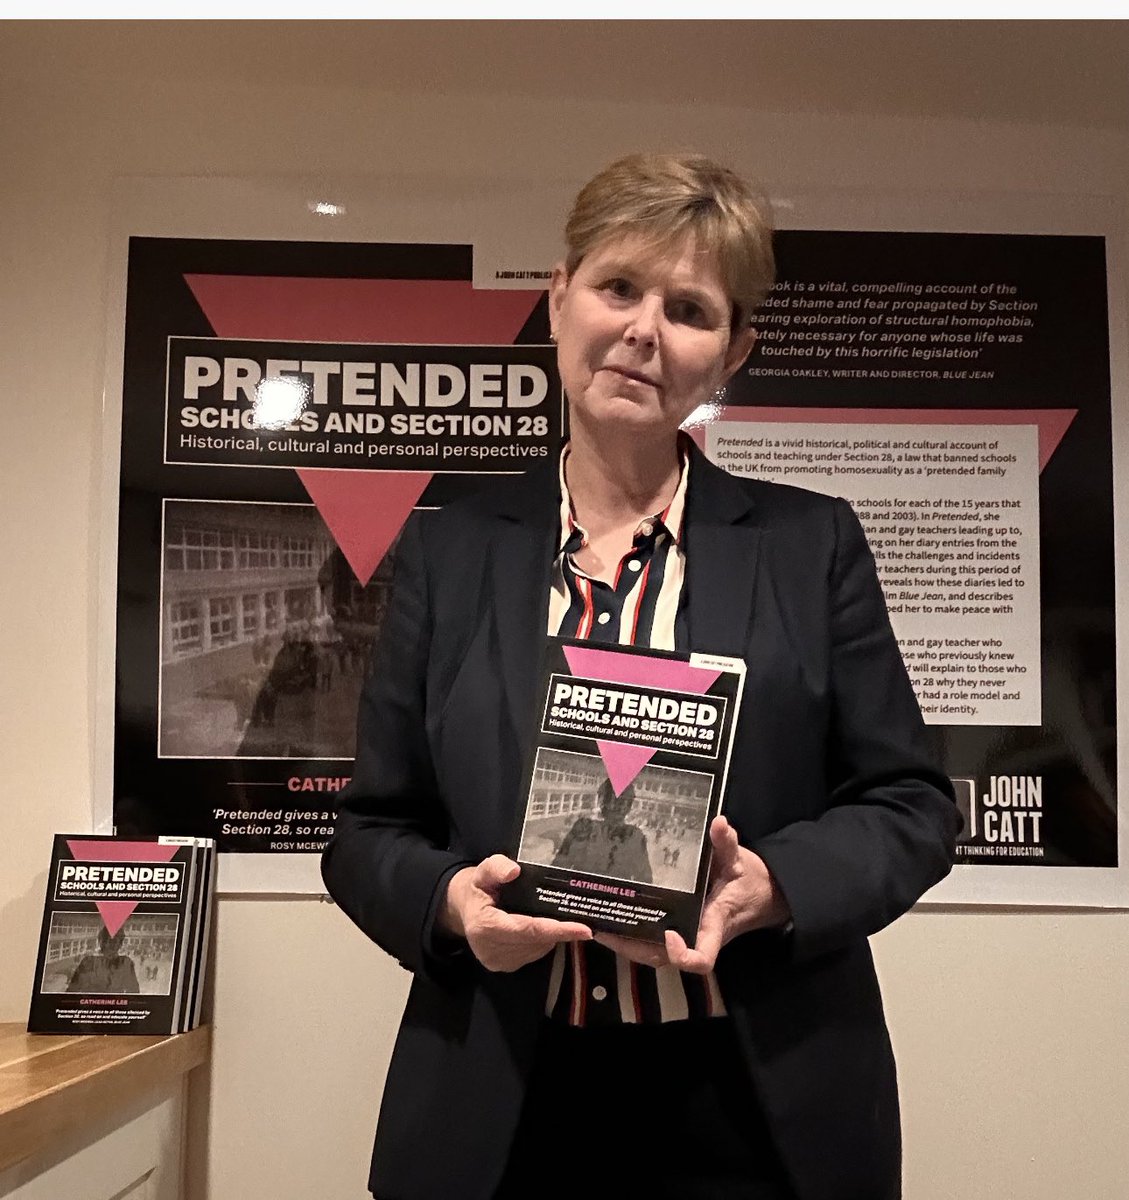 It’s #Pretended publication day! I feel very lucky to have had the support of some incredible people. Thank-you @jototogo @JohnCattEd @AngliaRuskin @cullecgk2008 @jobrassington @DrAdamBrett @Ge0r91a #RosyMcEwen